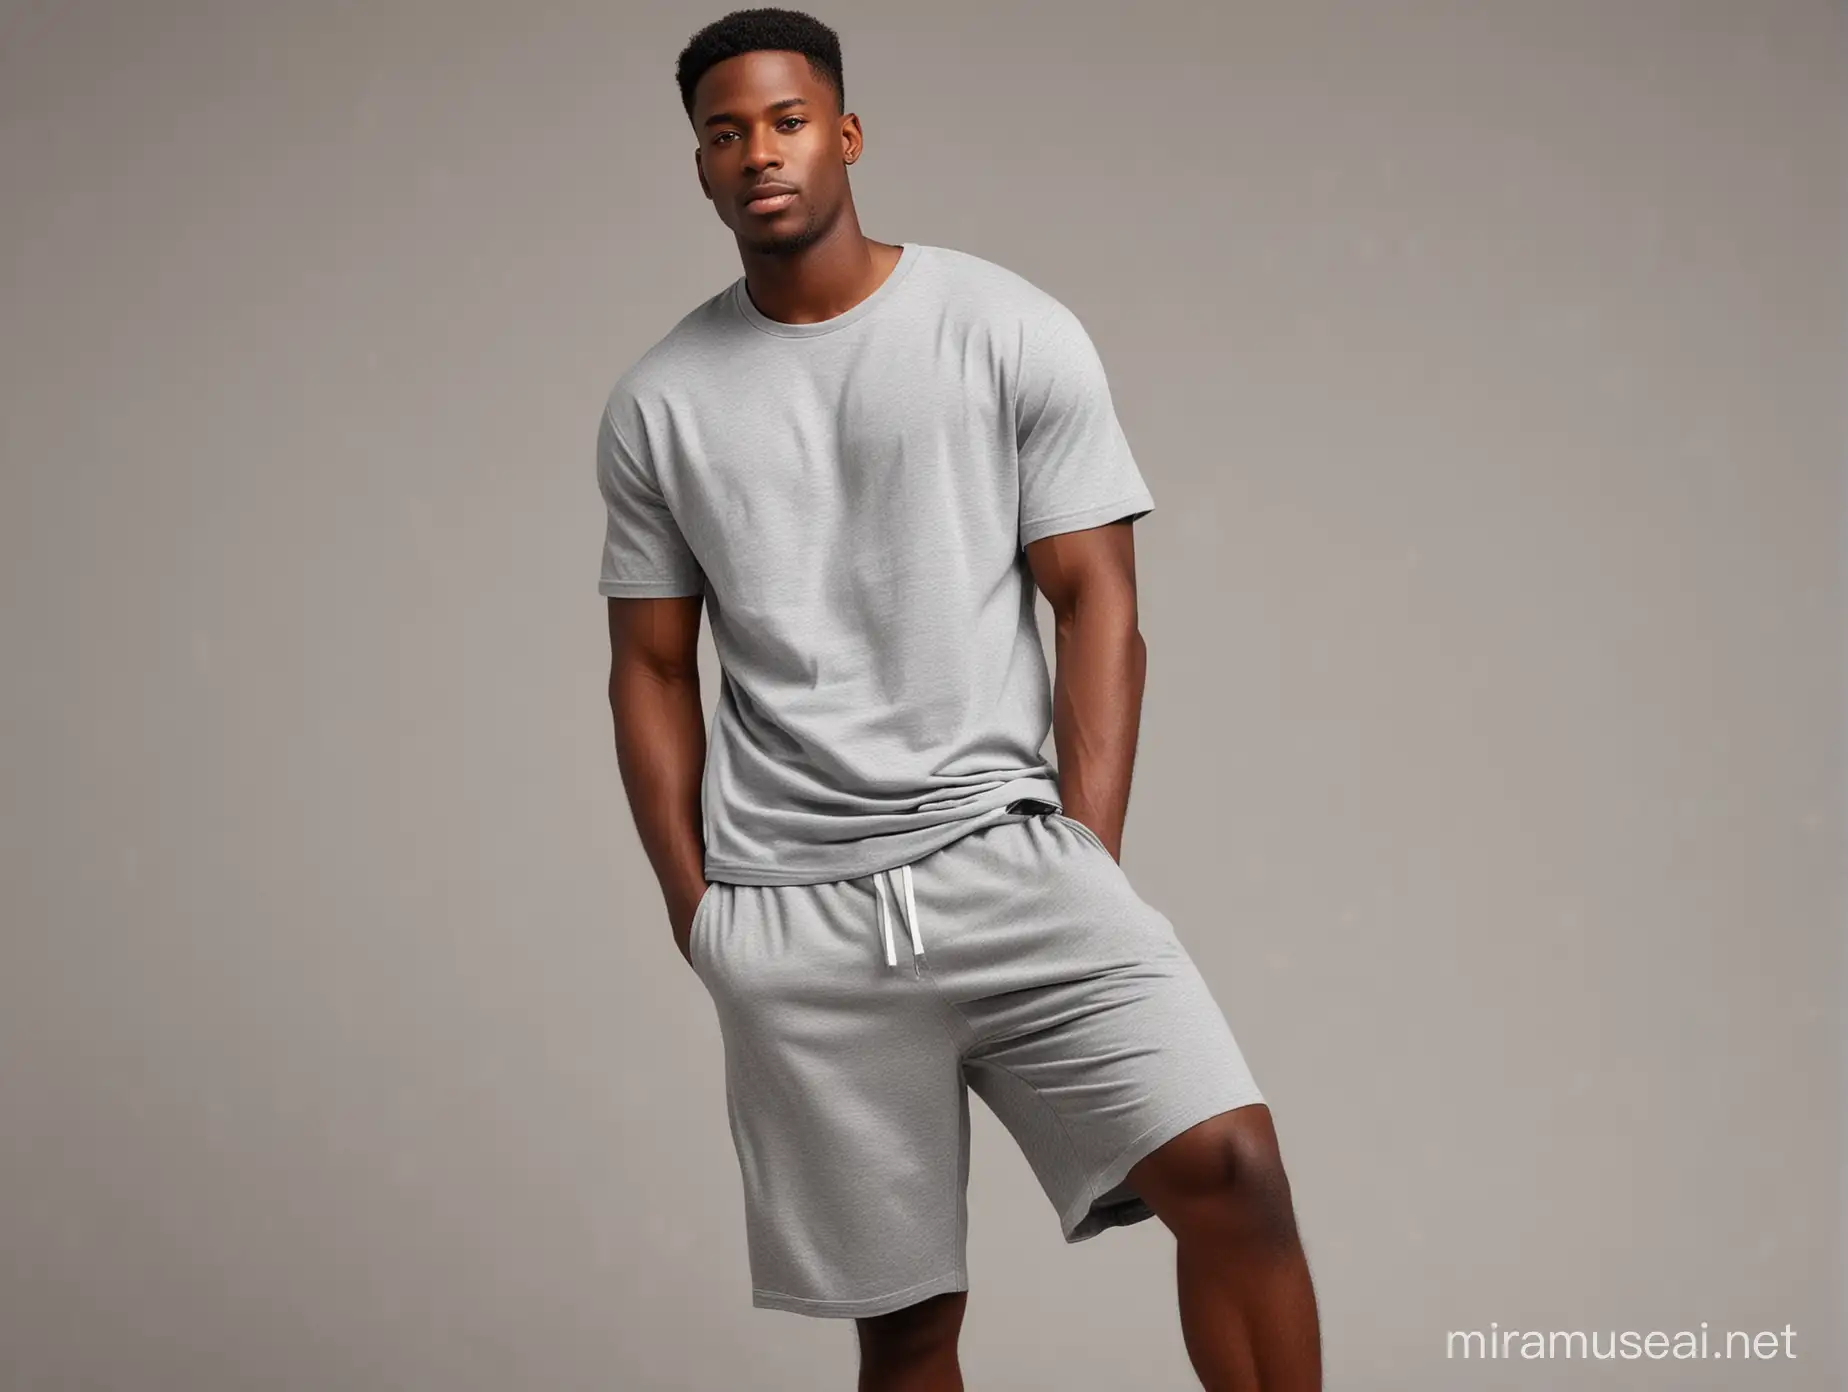 Black Man in Casual Grey Outfit